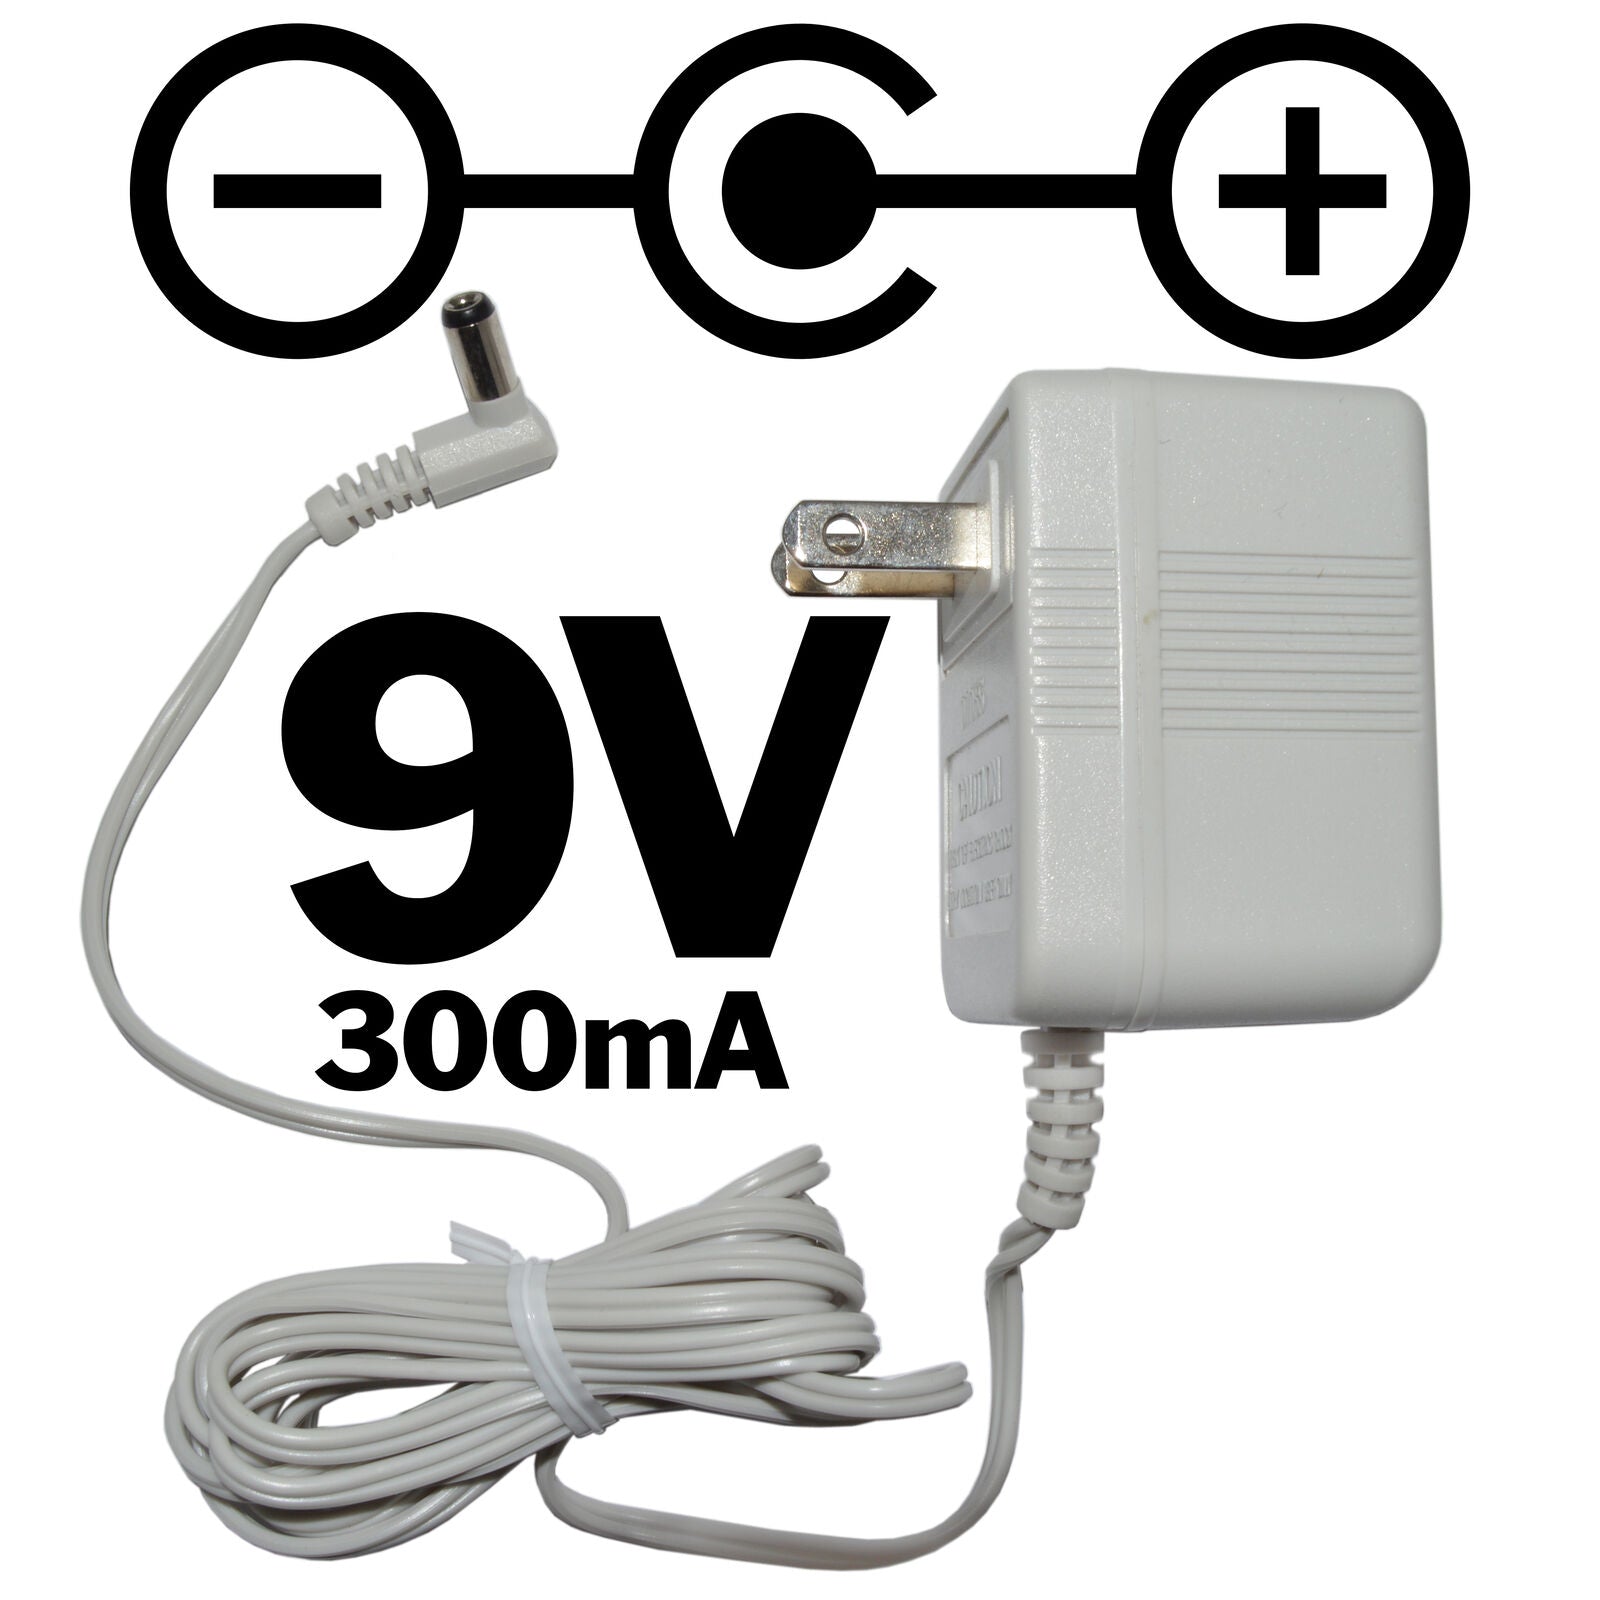 12V 3A POWER SUPPLY with 5.5mm OD/2.1mm ID DC Jack - US version